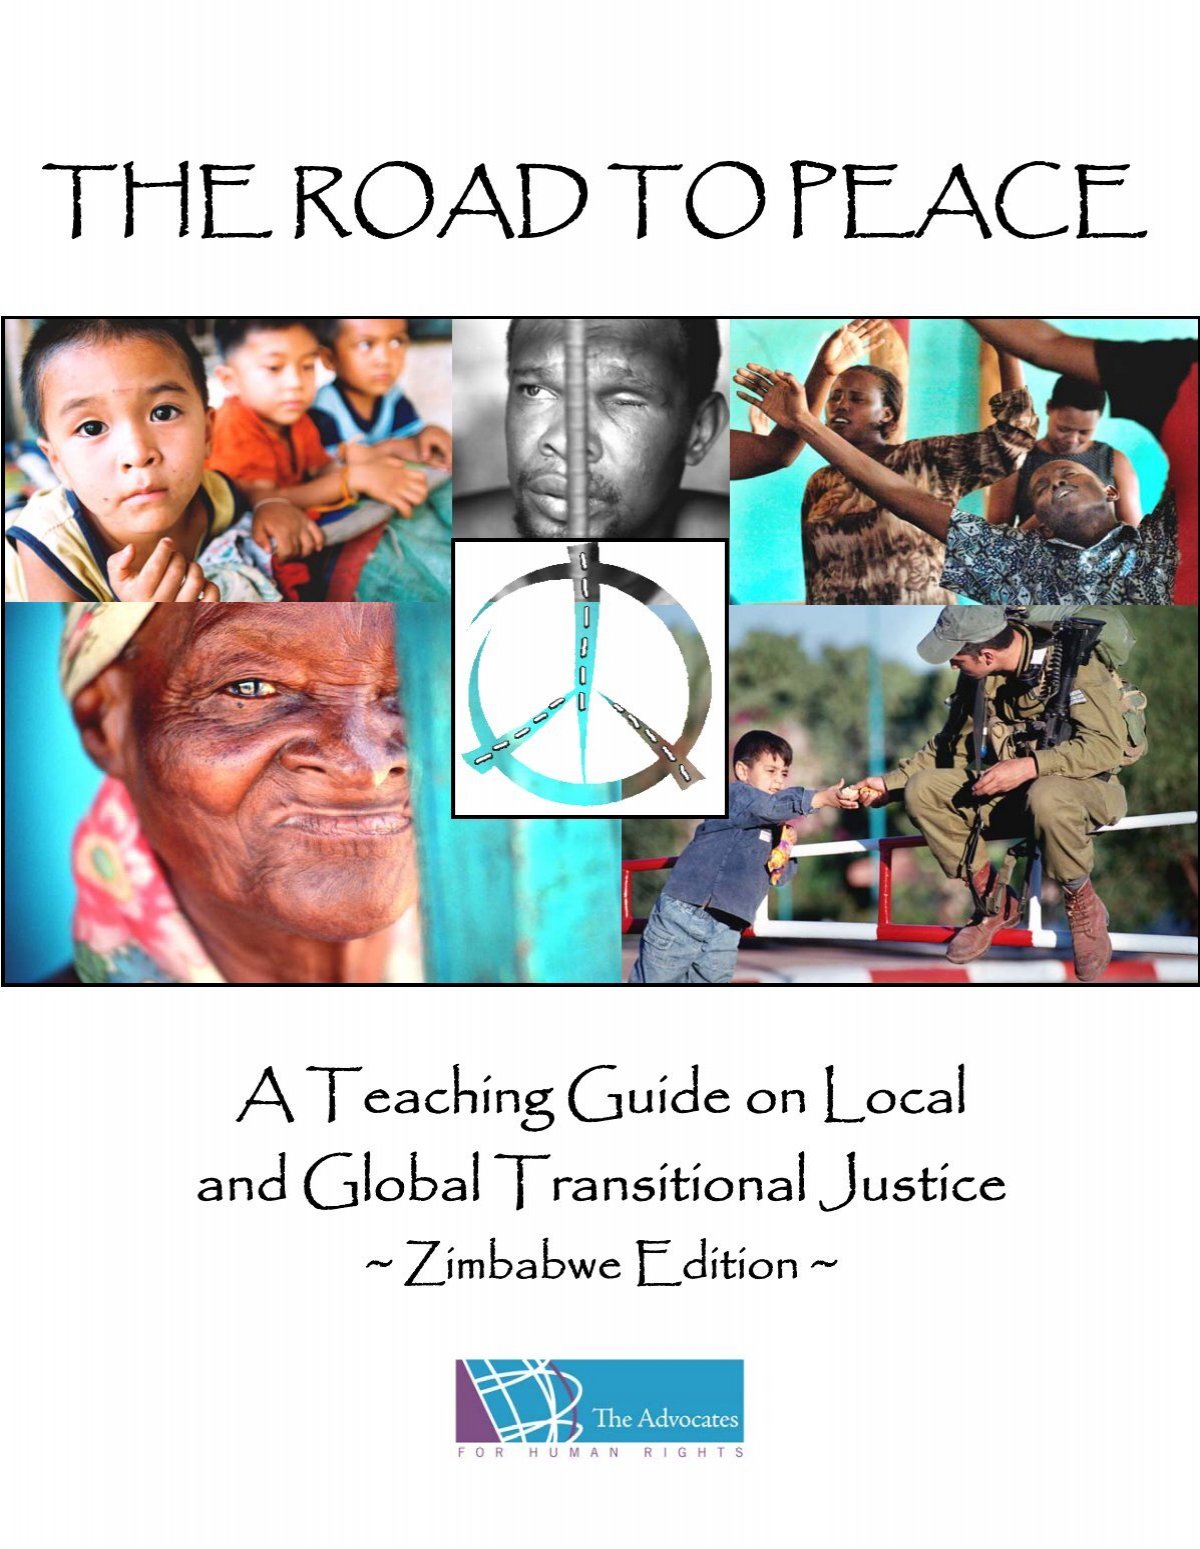 Download the complete curriculum adapted for Zimbabwe (4.6 MB)